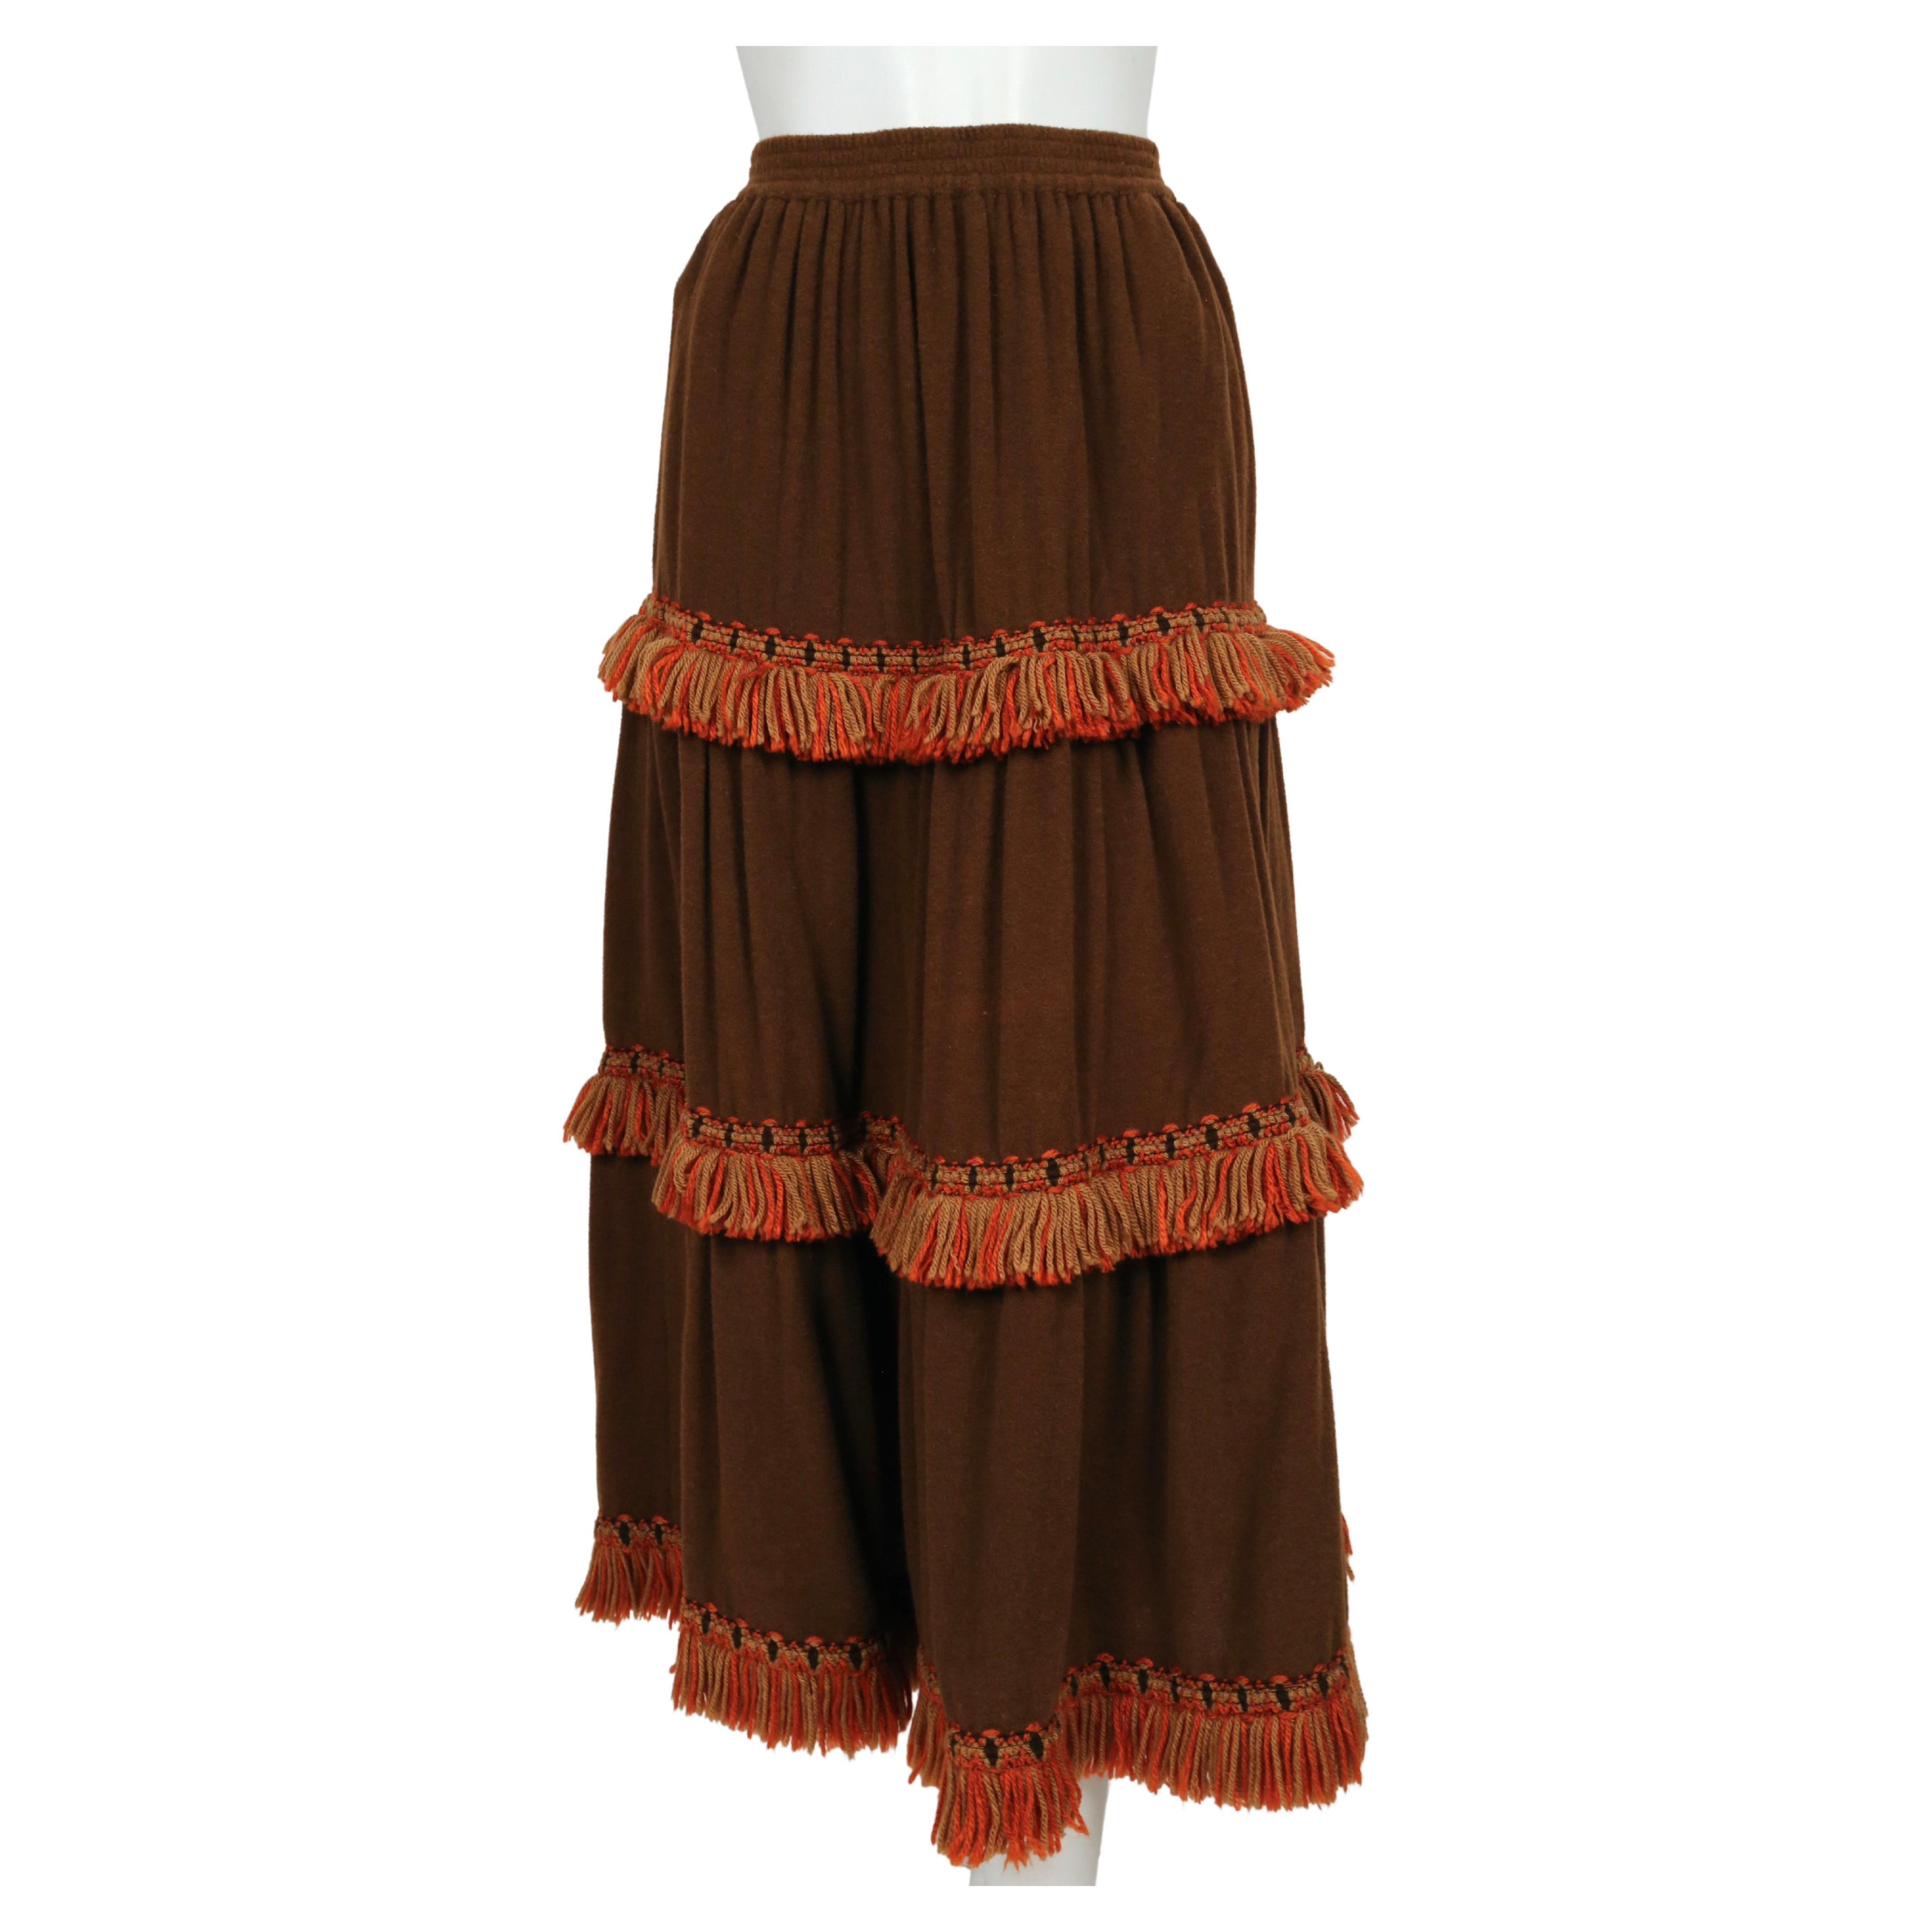 Very soft, rich brown wool skirt with tan and orange fringed yarn trim designed by Yves Saint Laurent dating to the 1970's. Labeled a FR 38. Approximate measurements (unstretched): waist 23.75